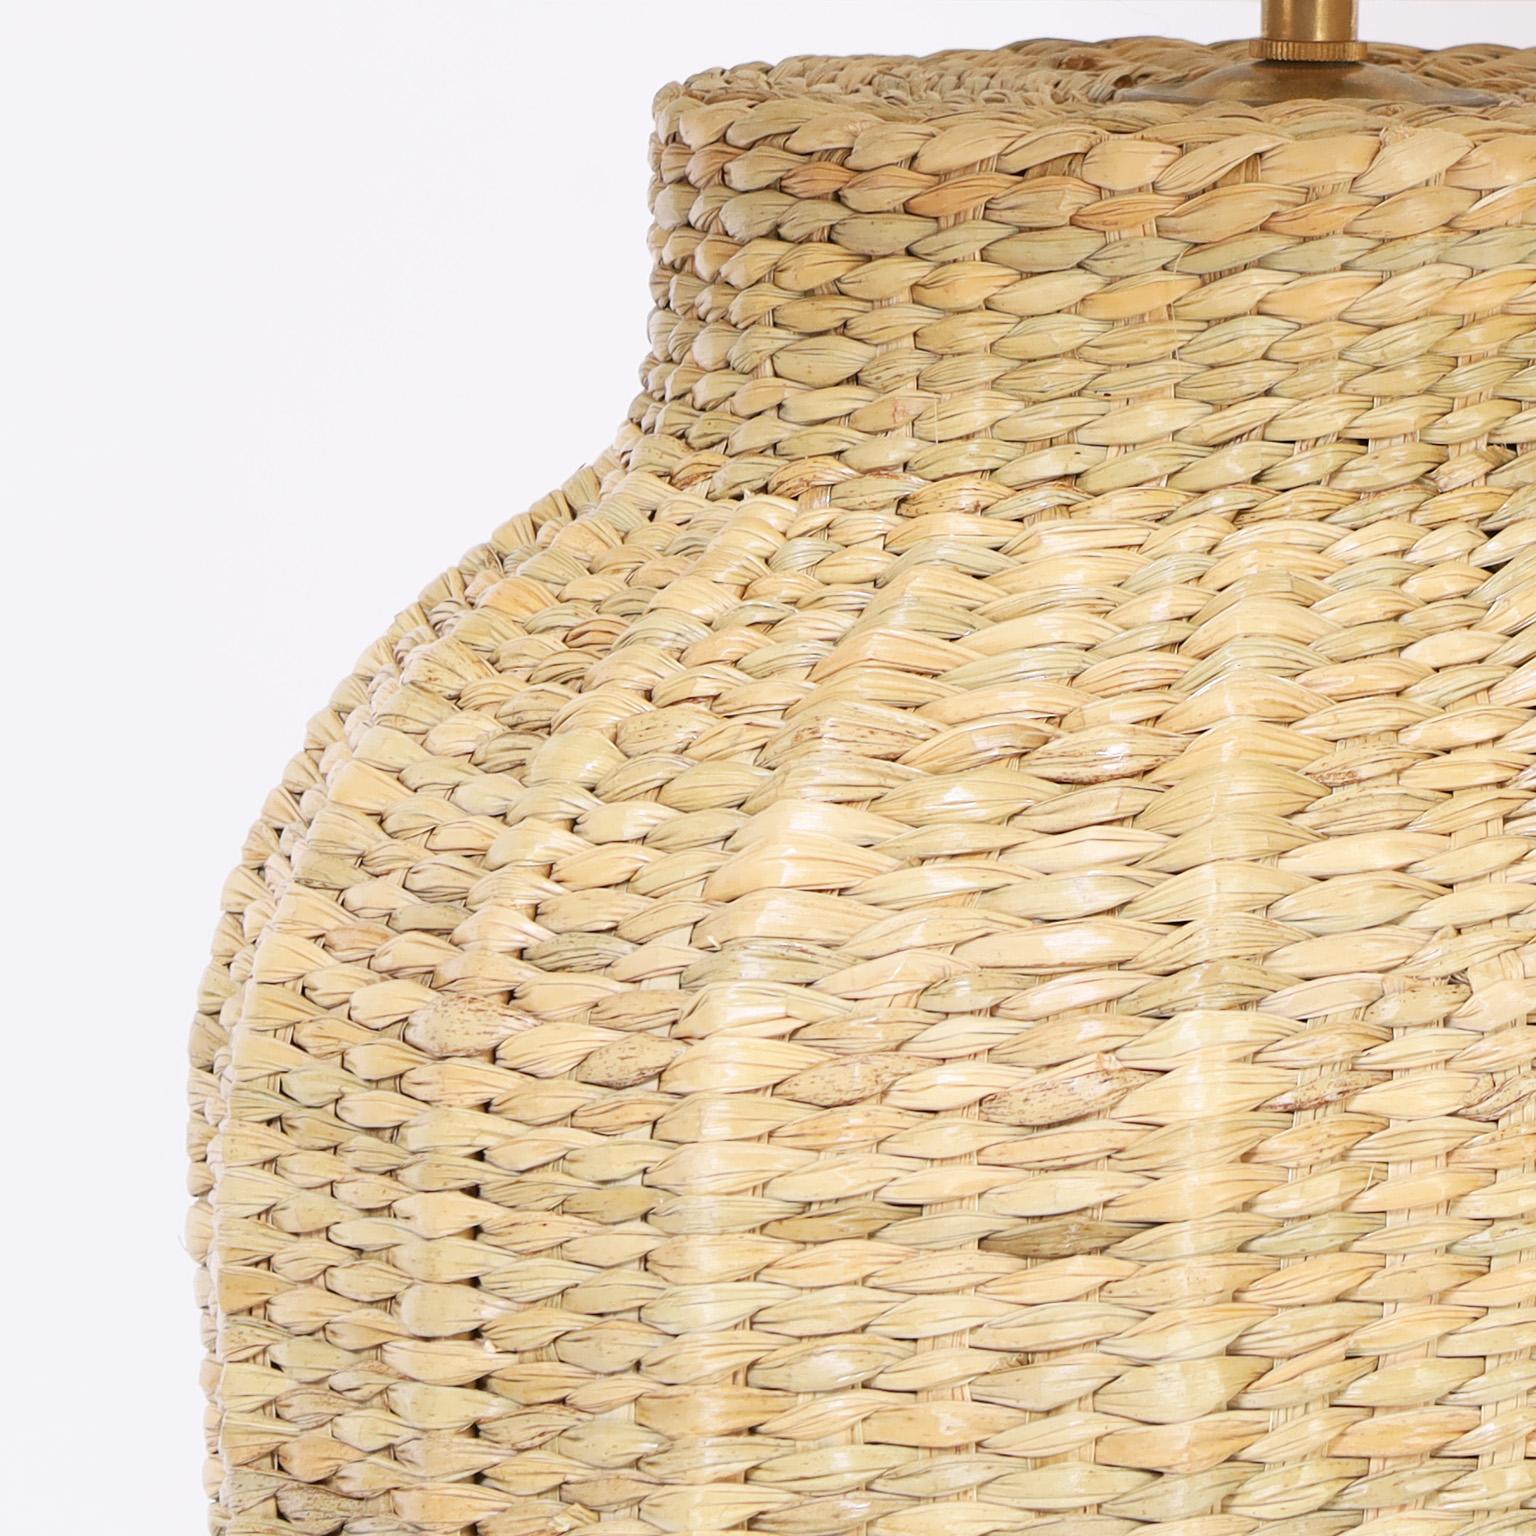 Mexican Pair of Wicker Bottle Form Table Lamps from the FS Flores Collection For Sale